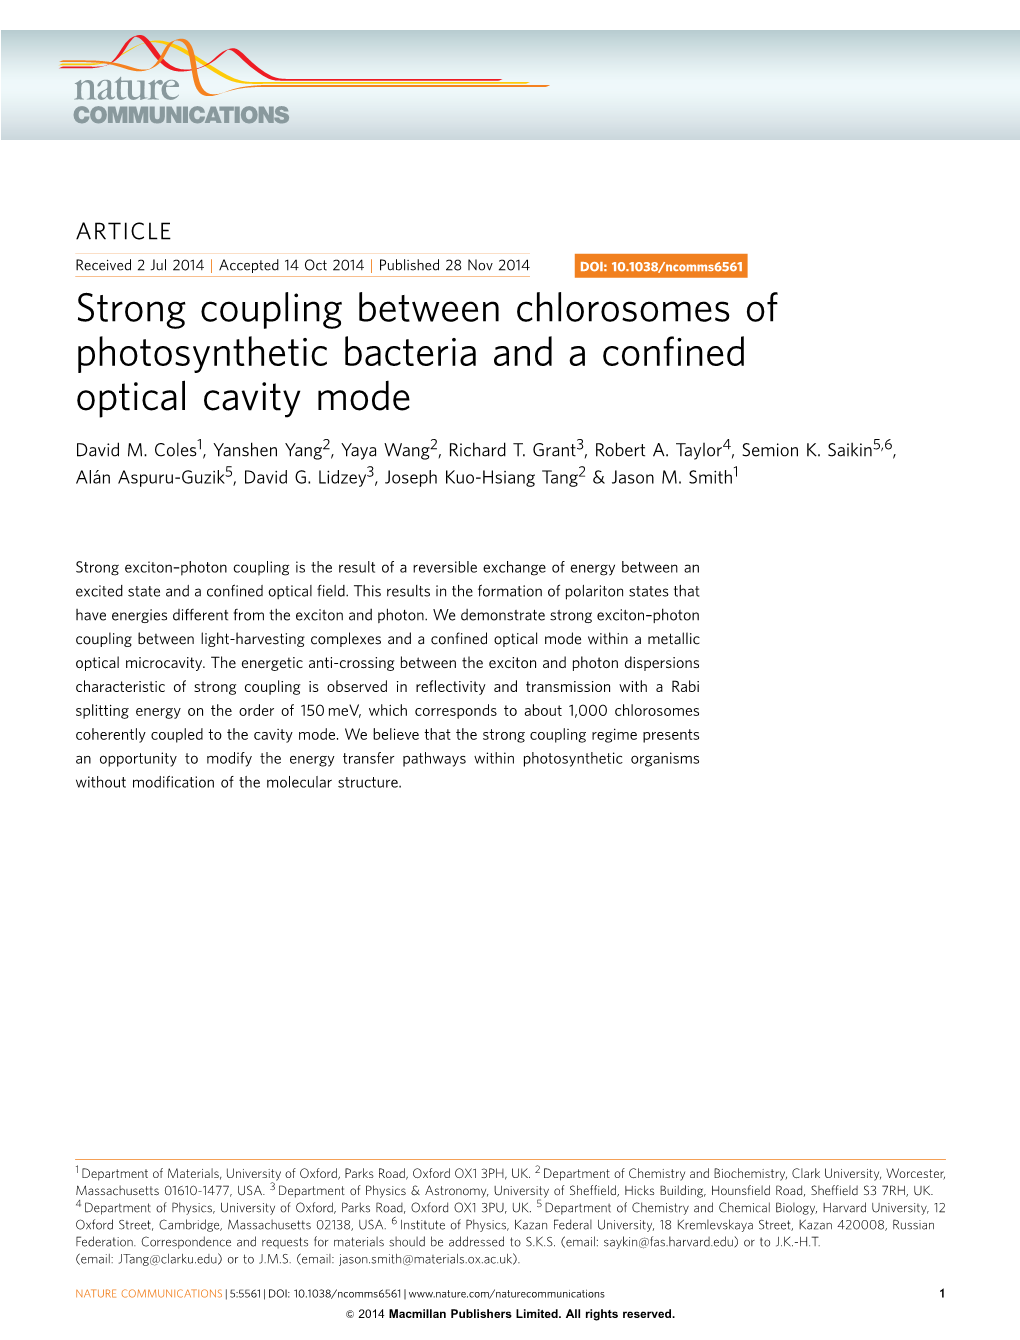 Strong Coupling Between Chlorosomes of Photosynthetic Bacteria and a Conﬁned Optical Cavity Mode